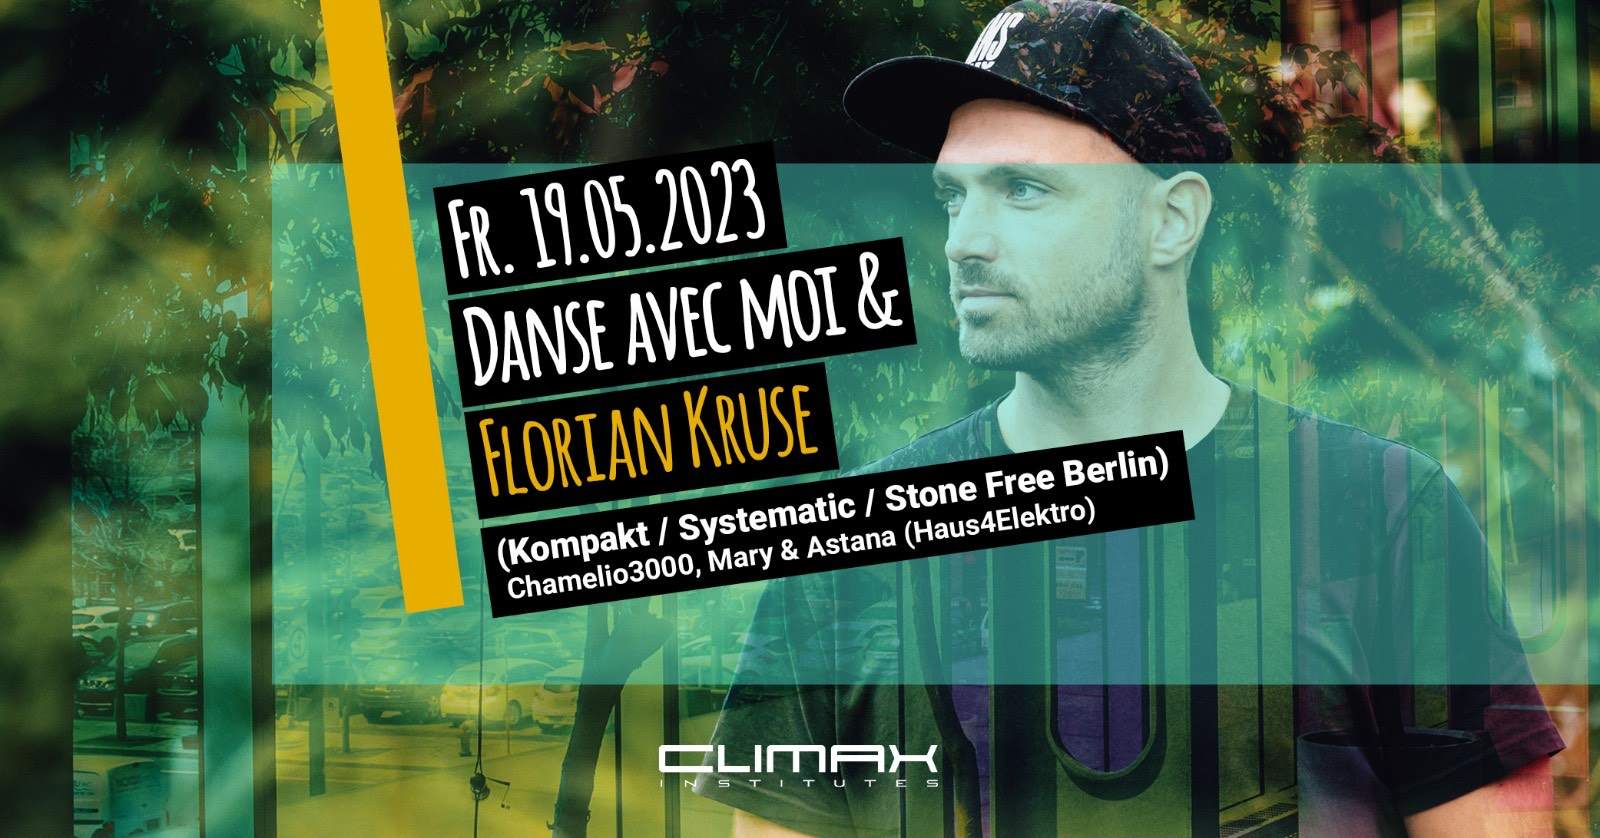 DANSE AVEC MOi with Florian Kruse (Kompakt / Systematic / Stone Free Berlin) - フライヤー表